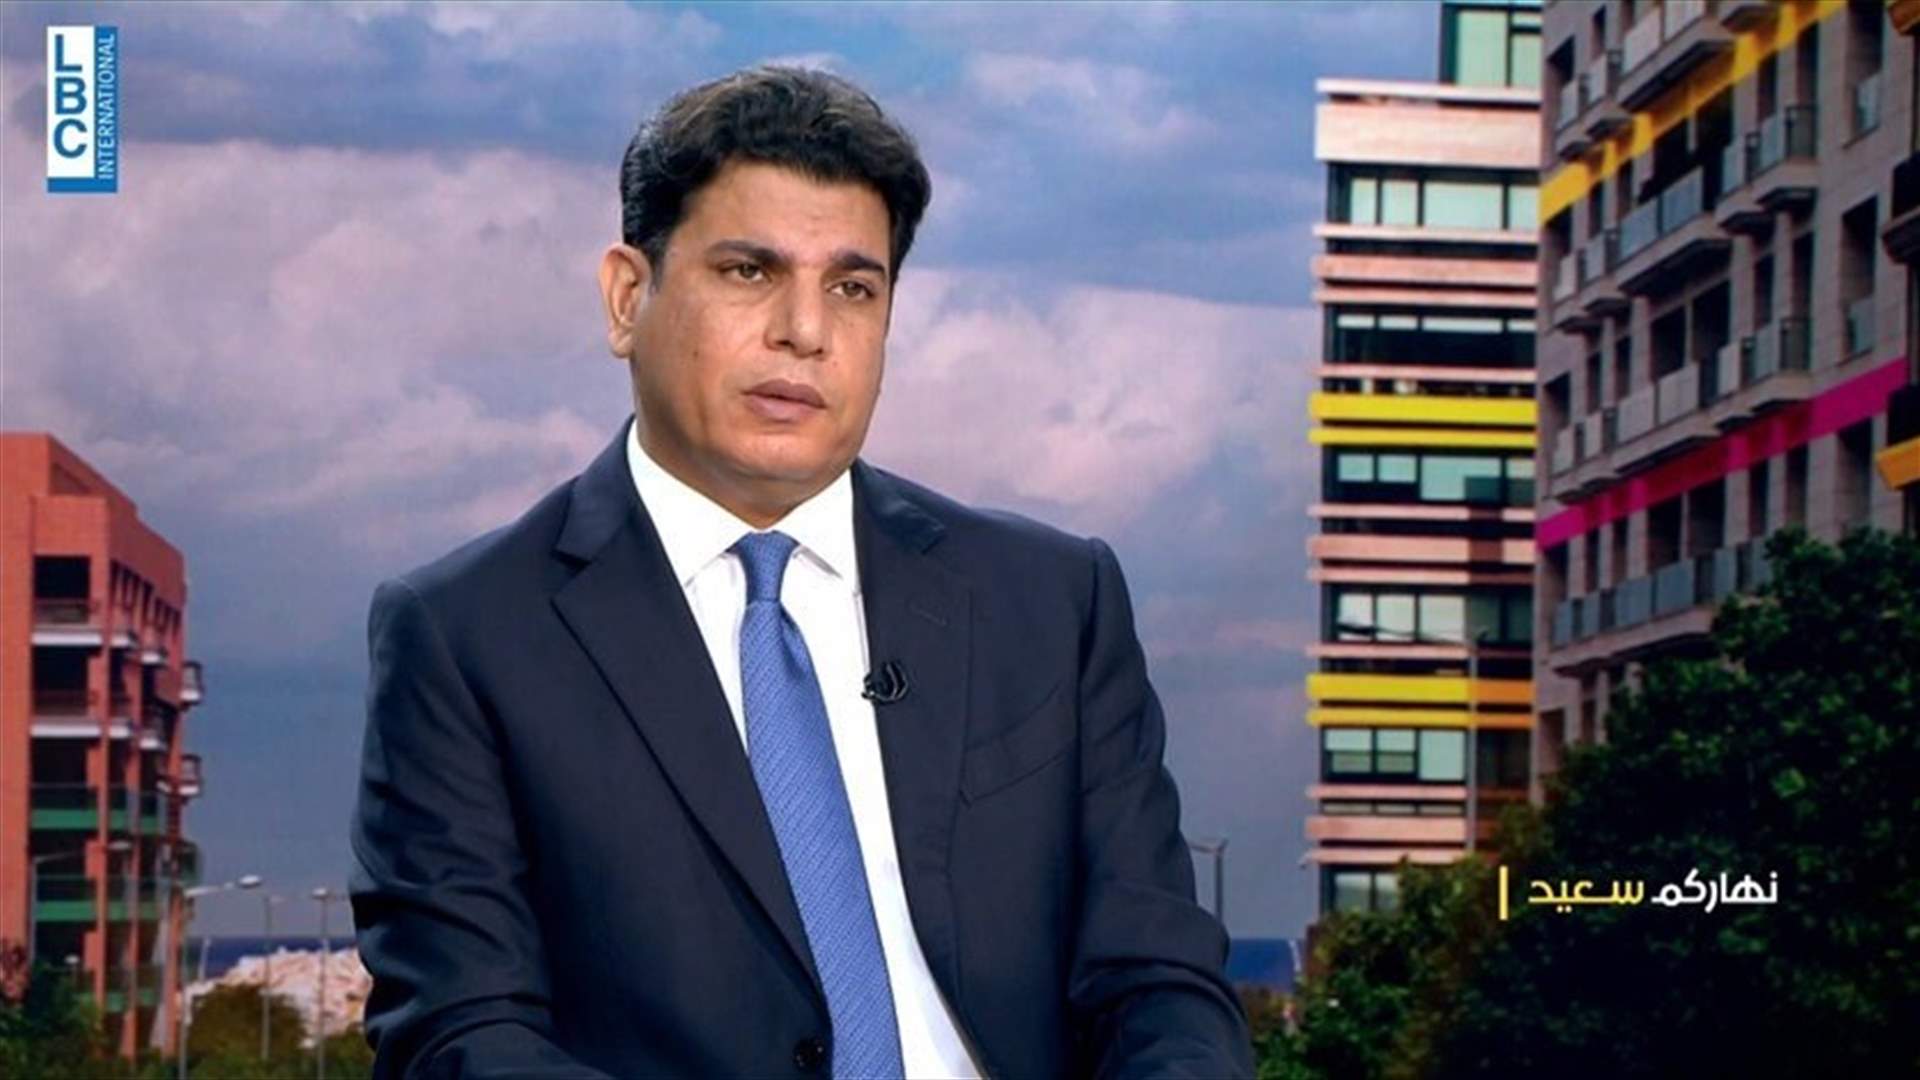 Zahran to LBCI: Hezbollah has yet to decide its presidential candidate